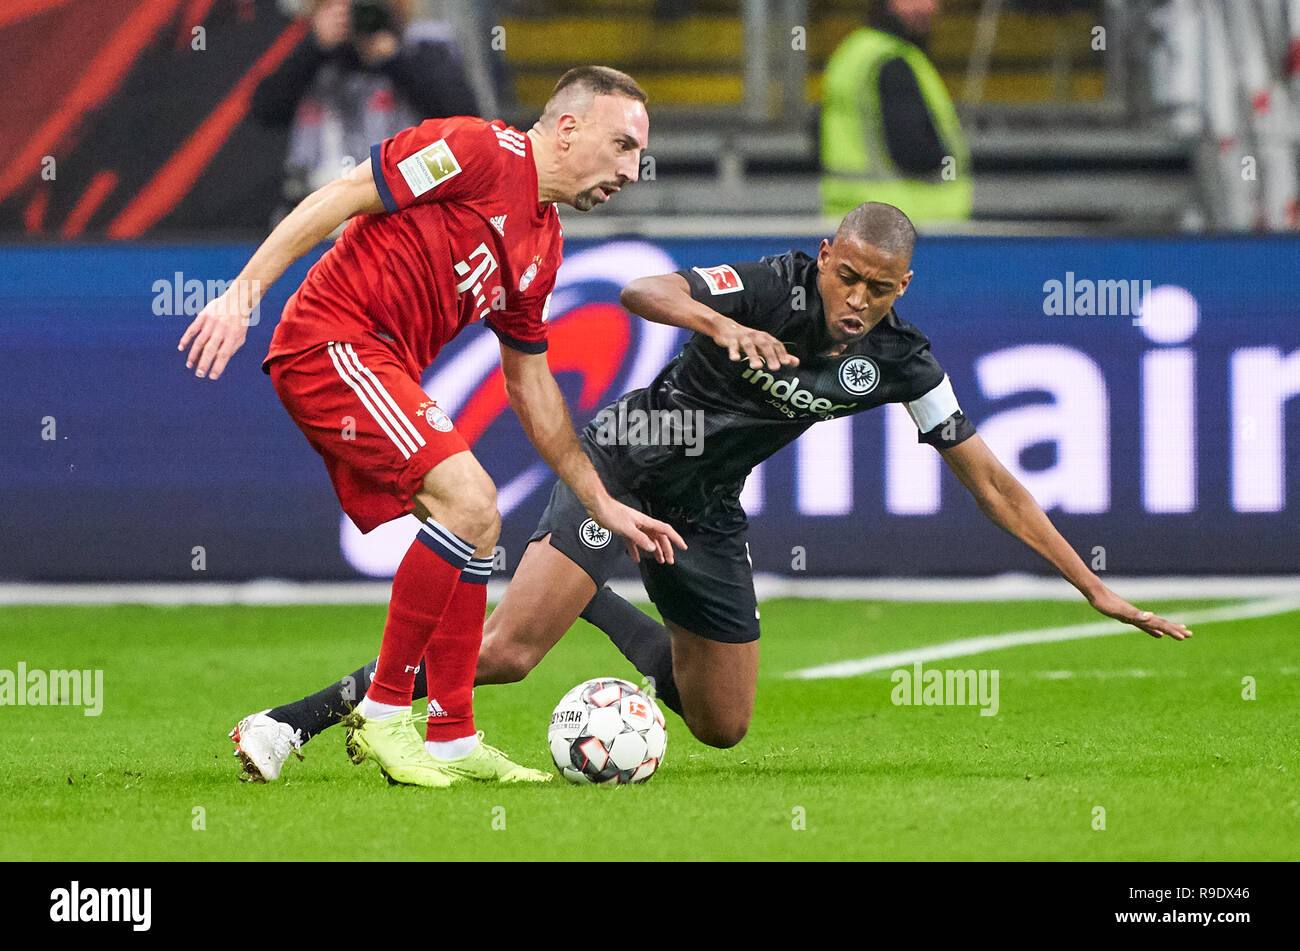 Frankfurt, Germany. 22nd Dec, 2018. Franck RIBERY, FCB 7 compete for the ball, tackling, duel, header, action, fight against Jetro WILLEMS, FRA 15 EINTRACHT FRANKFURT - FC BAYERN MUNICH 0-3 - DFL REGULATIONS PROHIBIT ANY USE OF PHOTOGRAPHS as IMAGE SEQUENCES and/or QUASI-VIDEO - 1.German Soccer League, in Frankfurt, December 22, 2018 Season 2018/2019, matchday 17, FCB, München, Credit: Peter Schatz/Alamy Live News Stock Photo